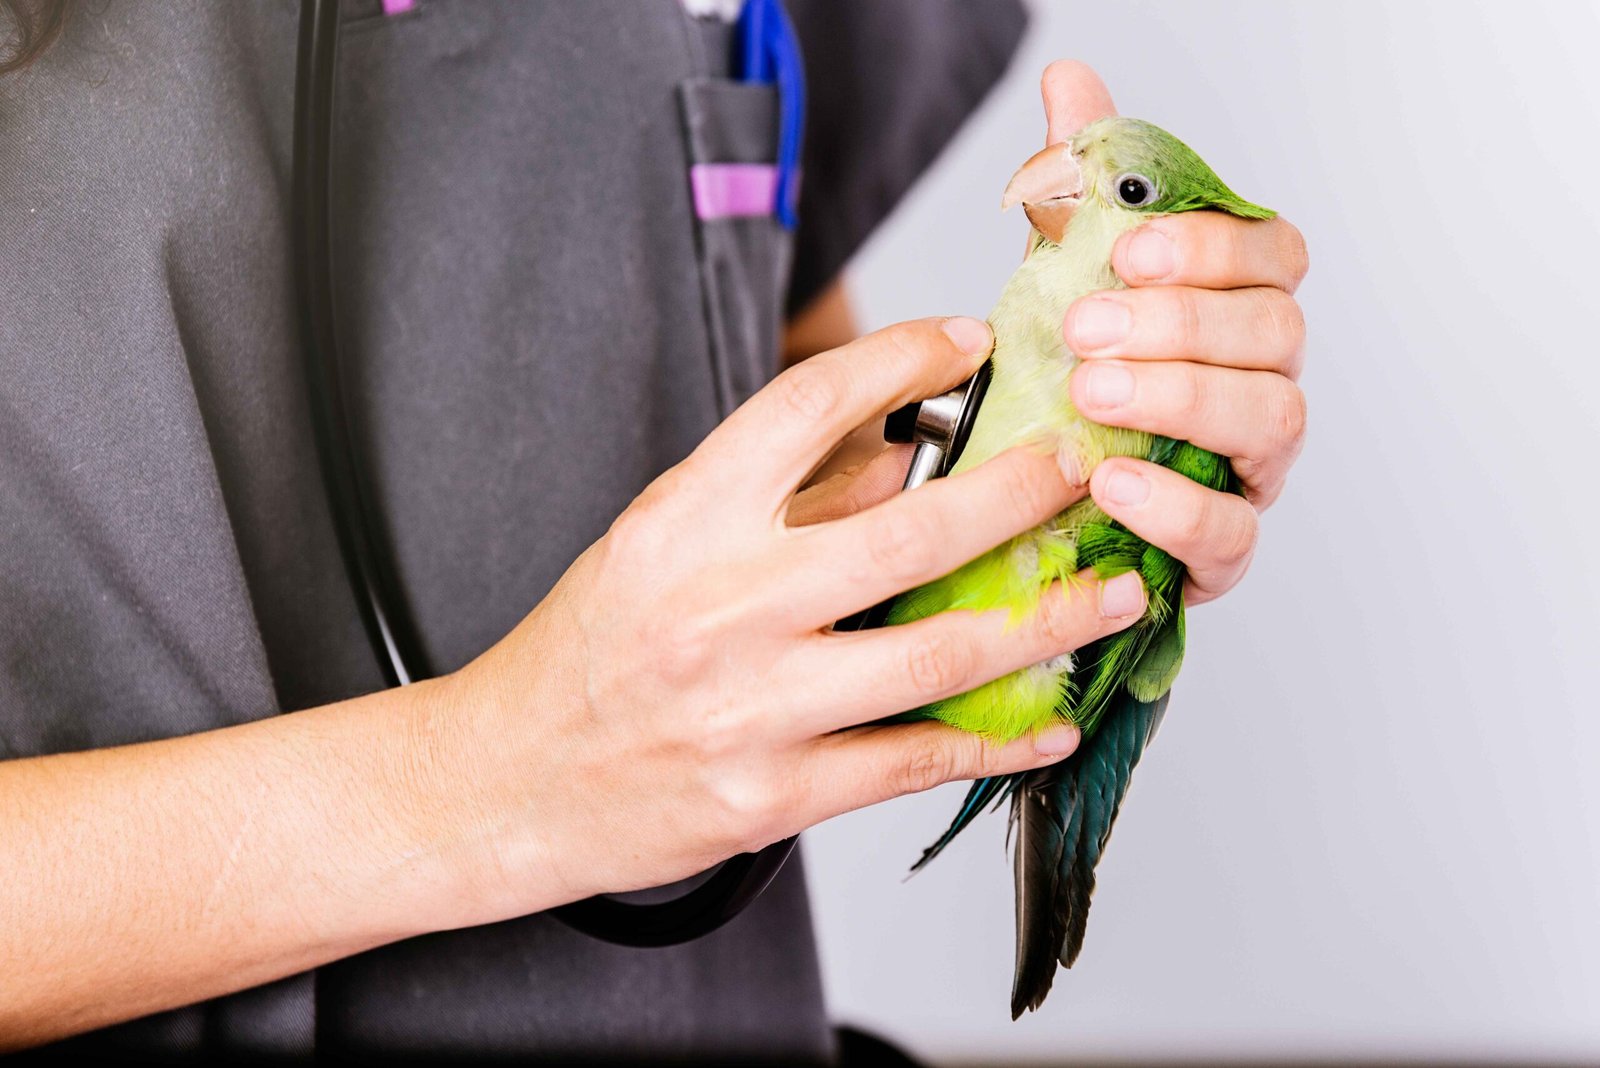 What vaccines and medications are necessary for your pet bird?